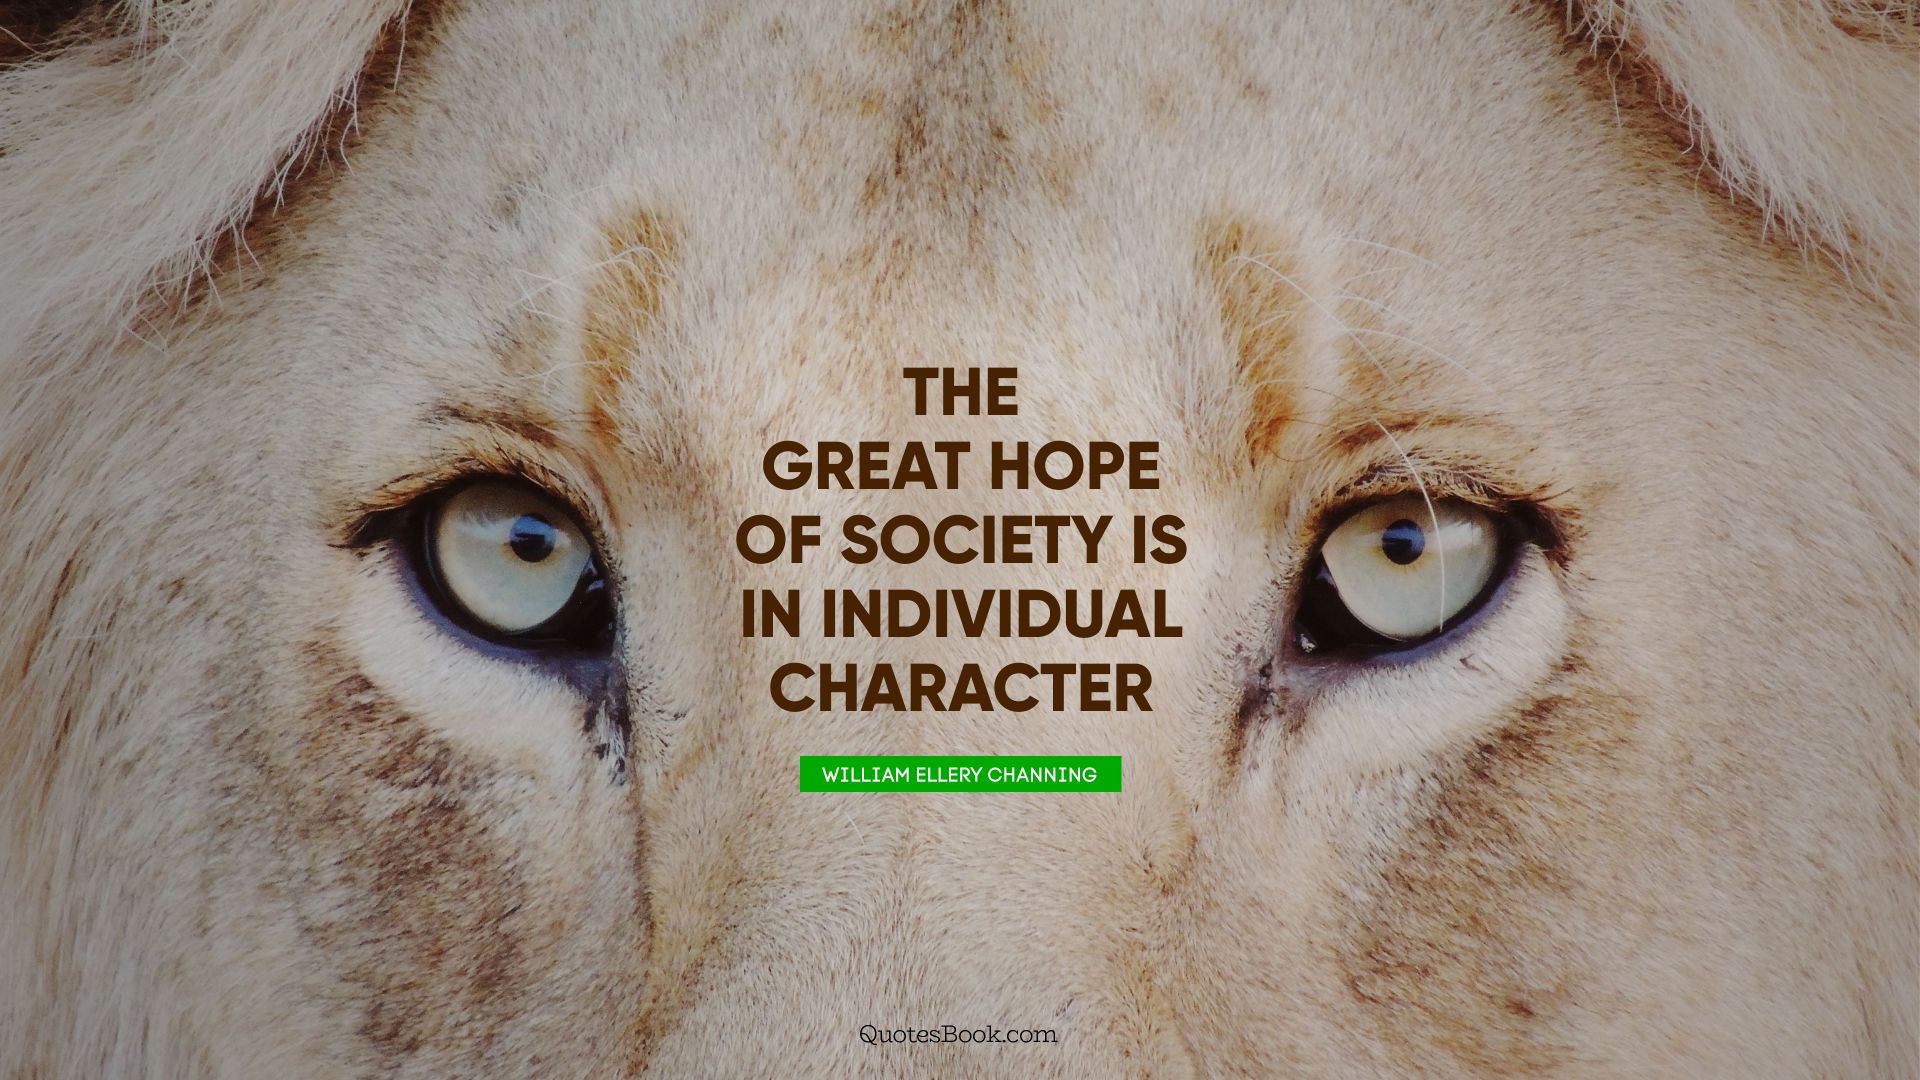 The great hope of society is in individual character. - Quote by William Ellery Channing